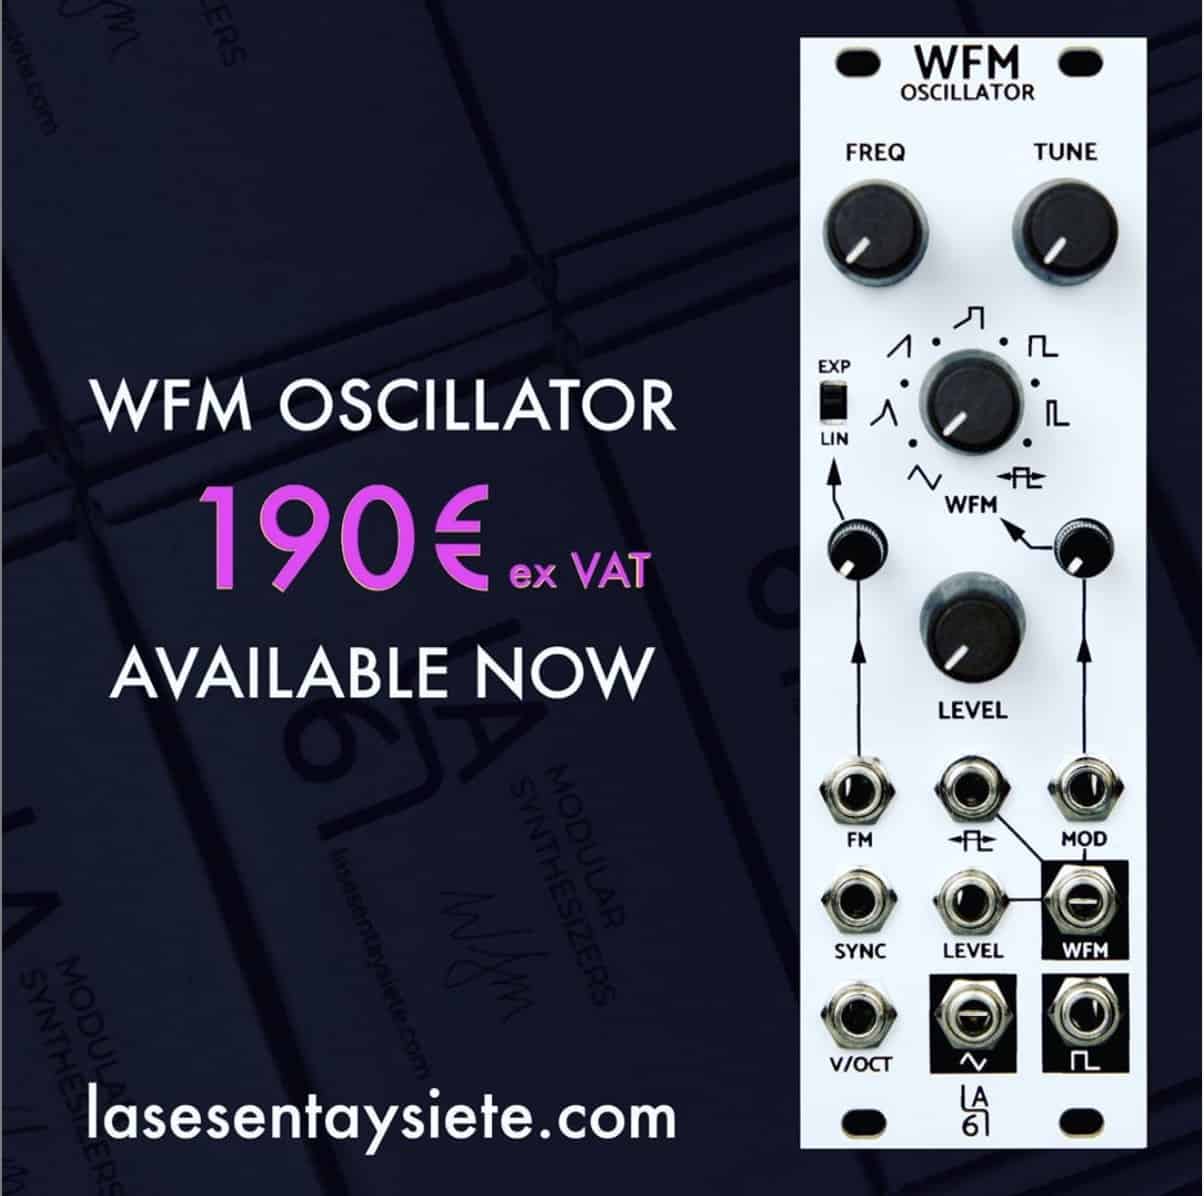 WFM Oscillator is now available from dealers in the La 67 webshop